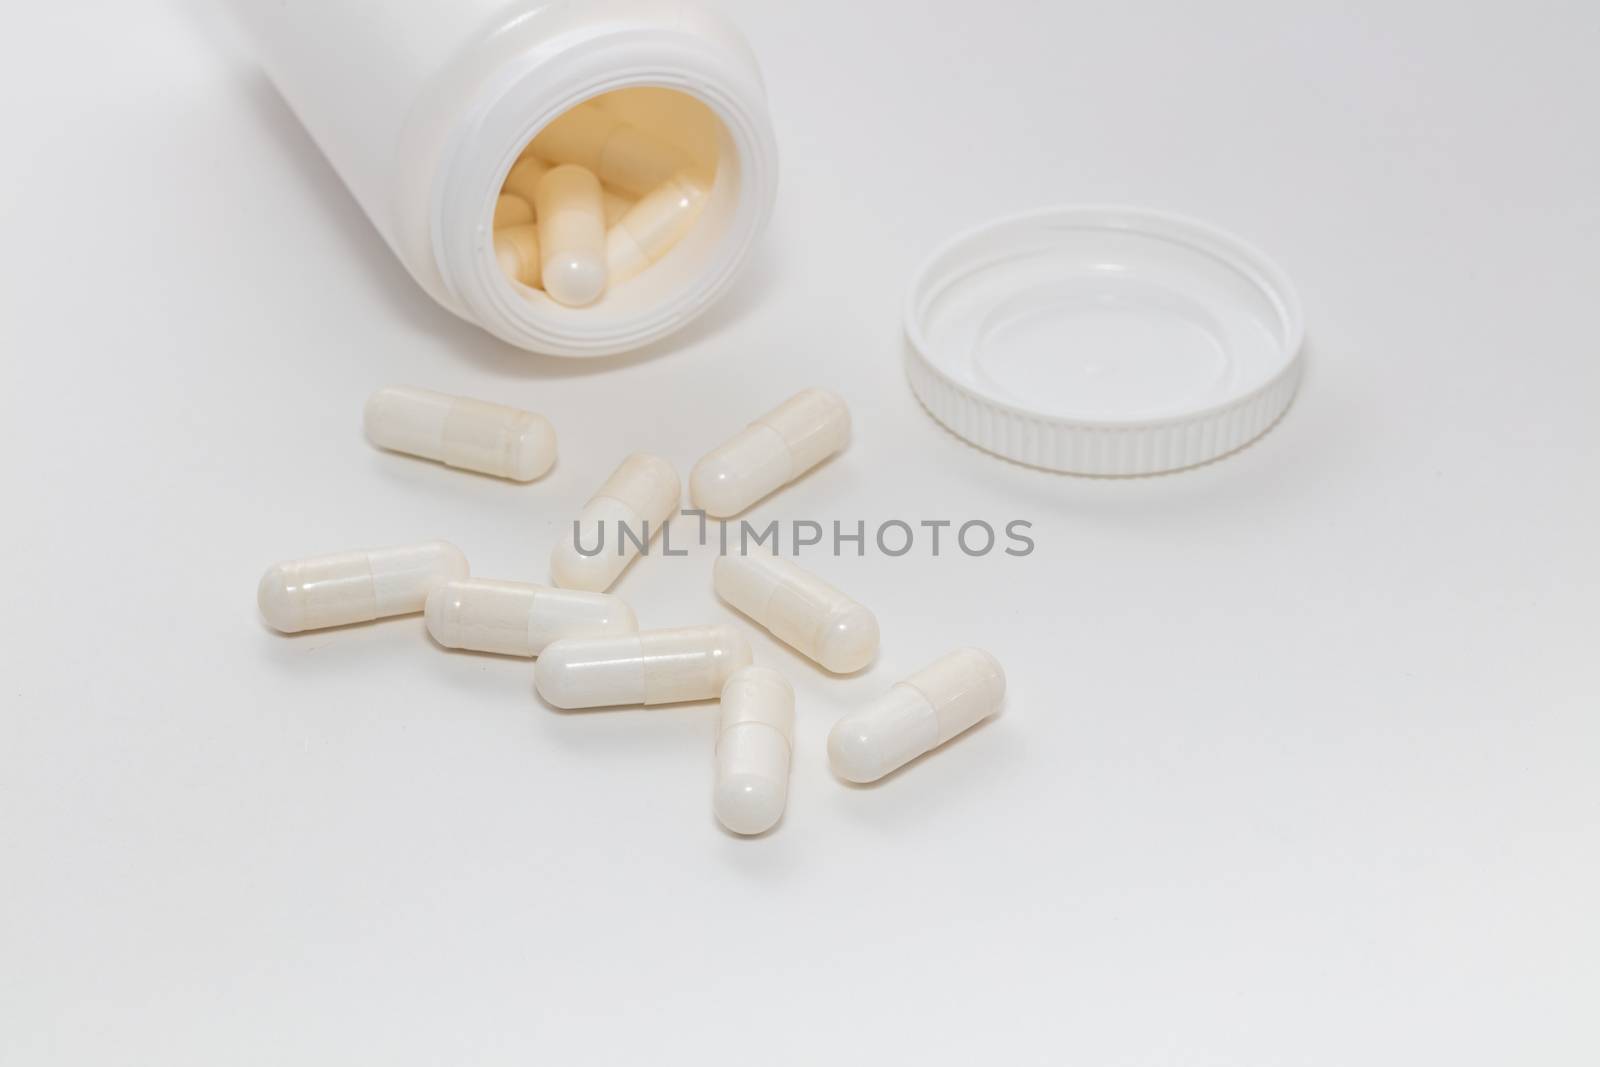 Bunch of white scattered pills on white background. White pills container and cap next to them slightly out of focus in the background. Pharmaceutical business and medicine sale concepts. by DamantisZ